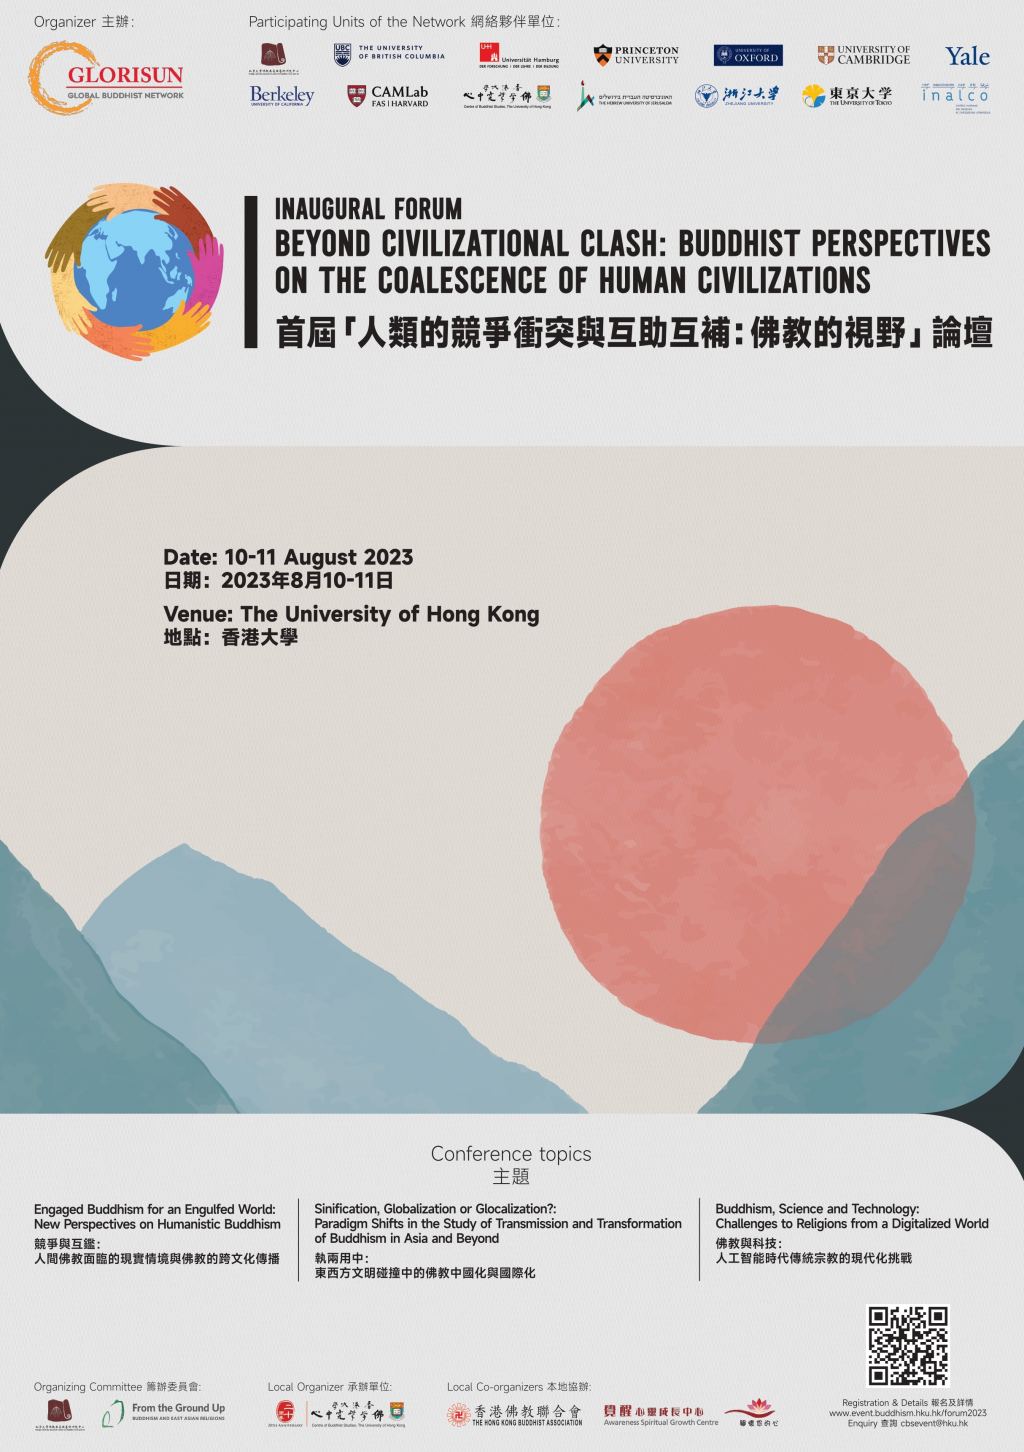 Beyond Civilizational Clash: Buddhist Perspectives on the Coalescence of Human Civilizations